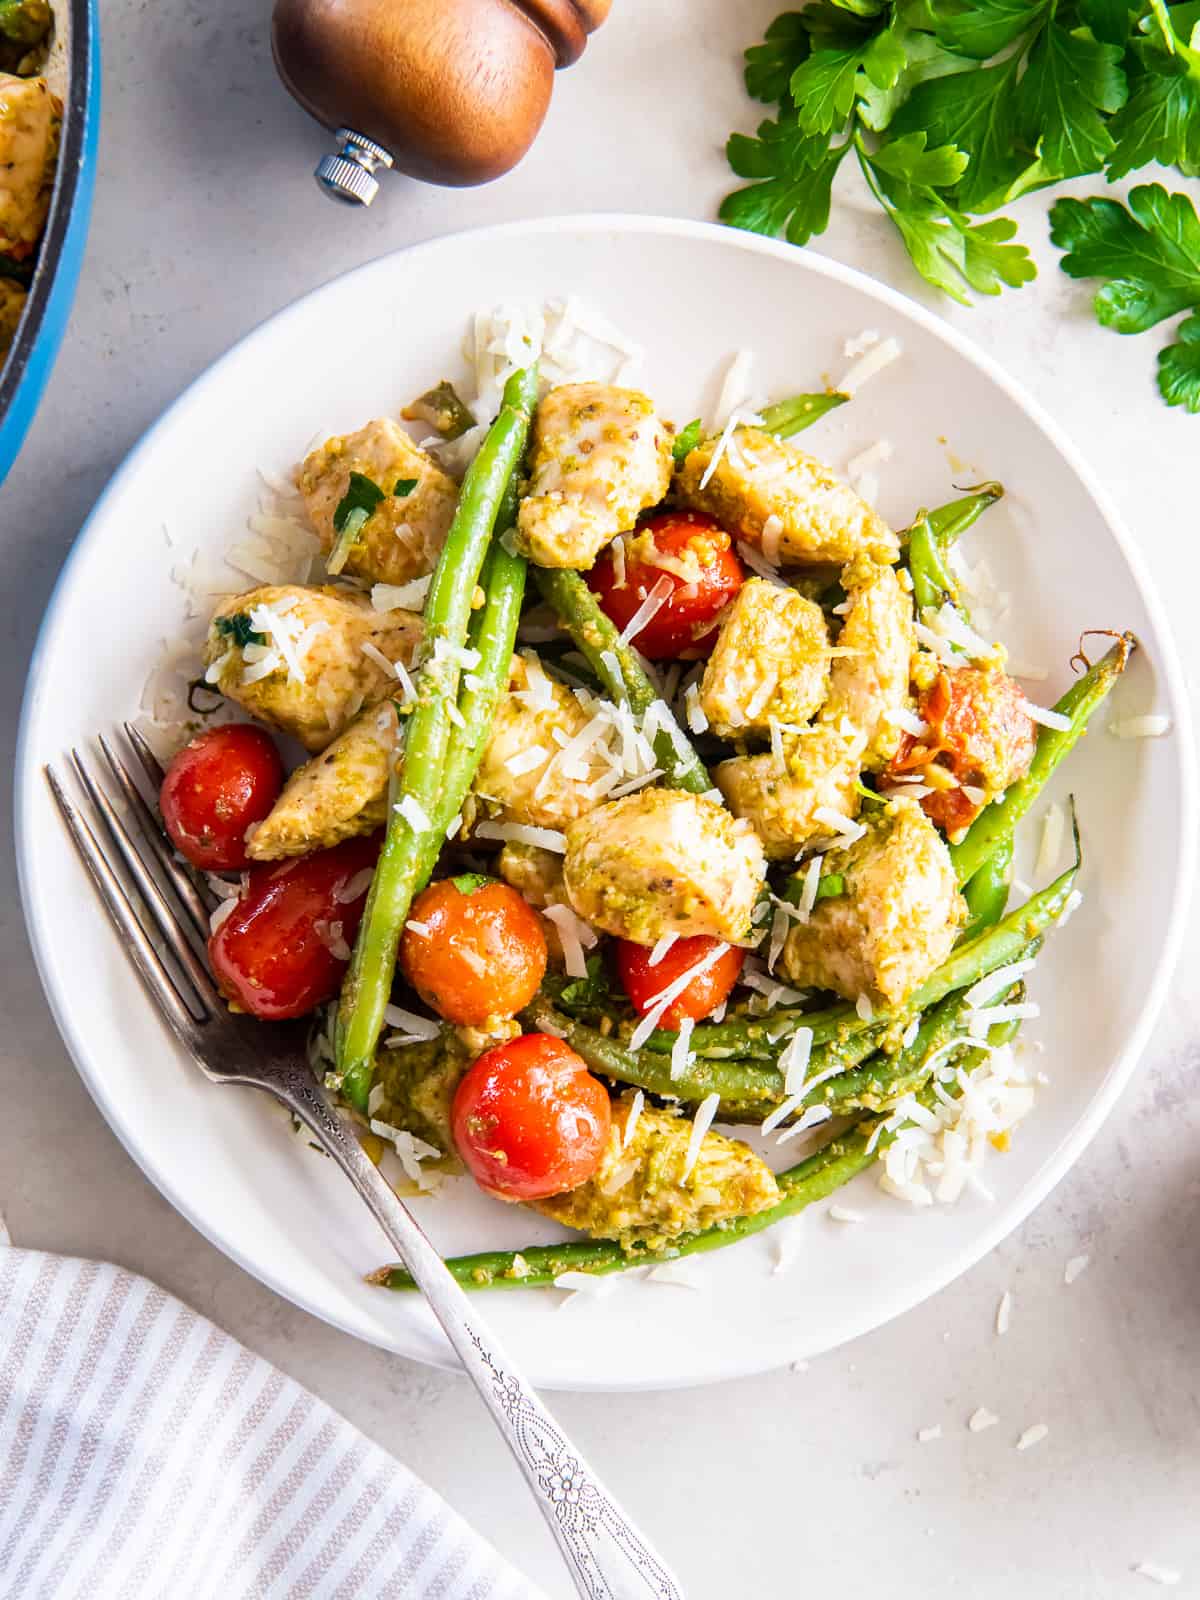 A serving of pesto chicken with green beans and tomatoes topped with Parmesan on a white plate.